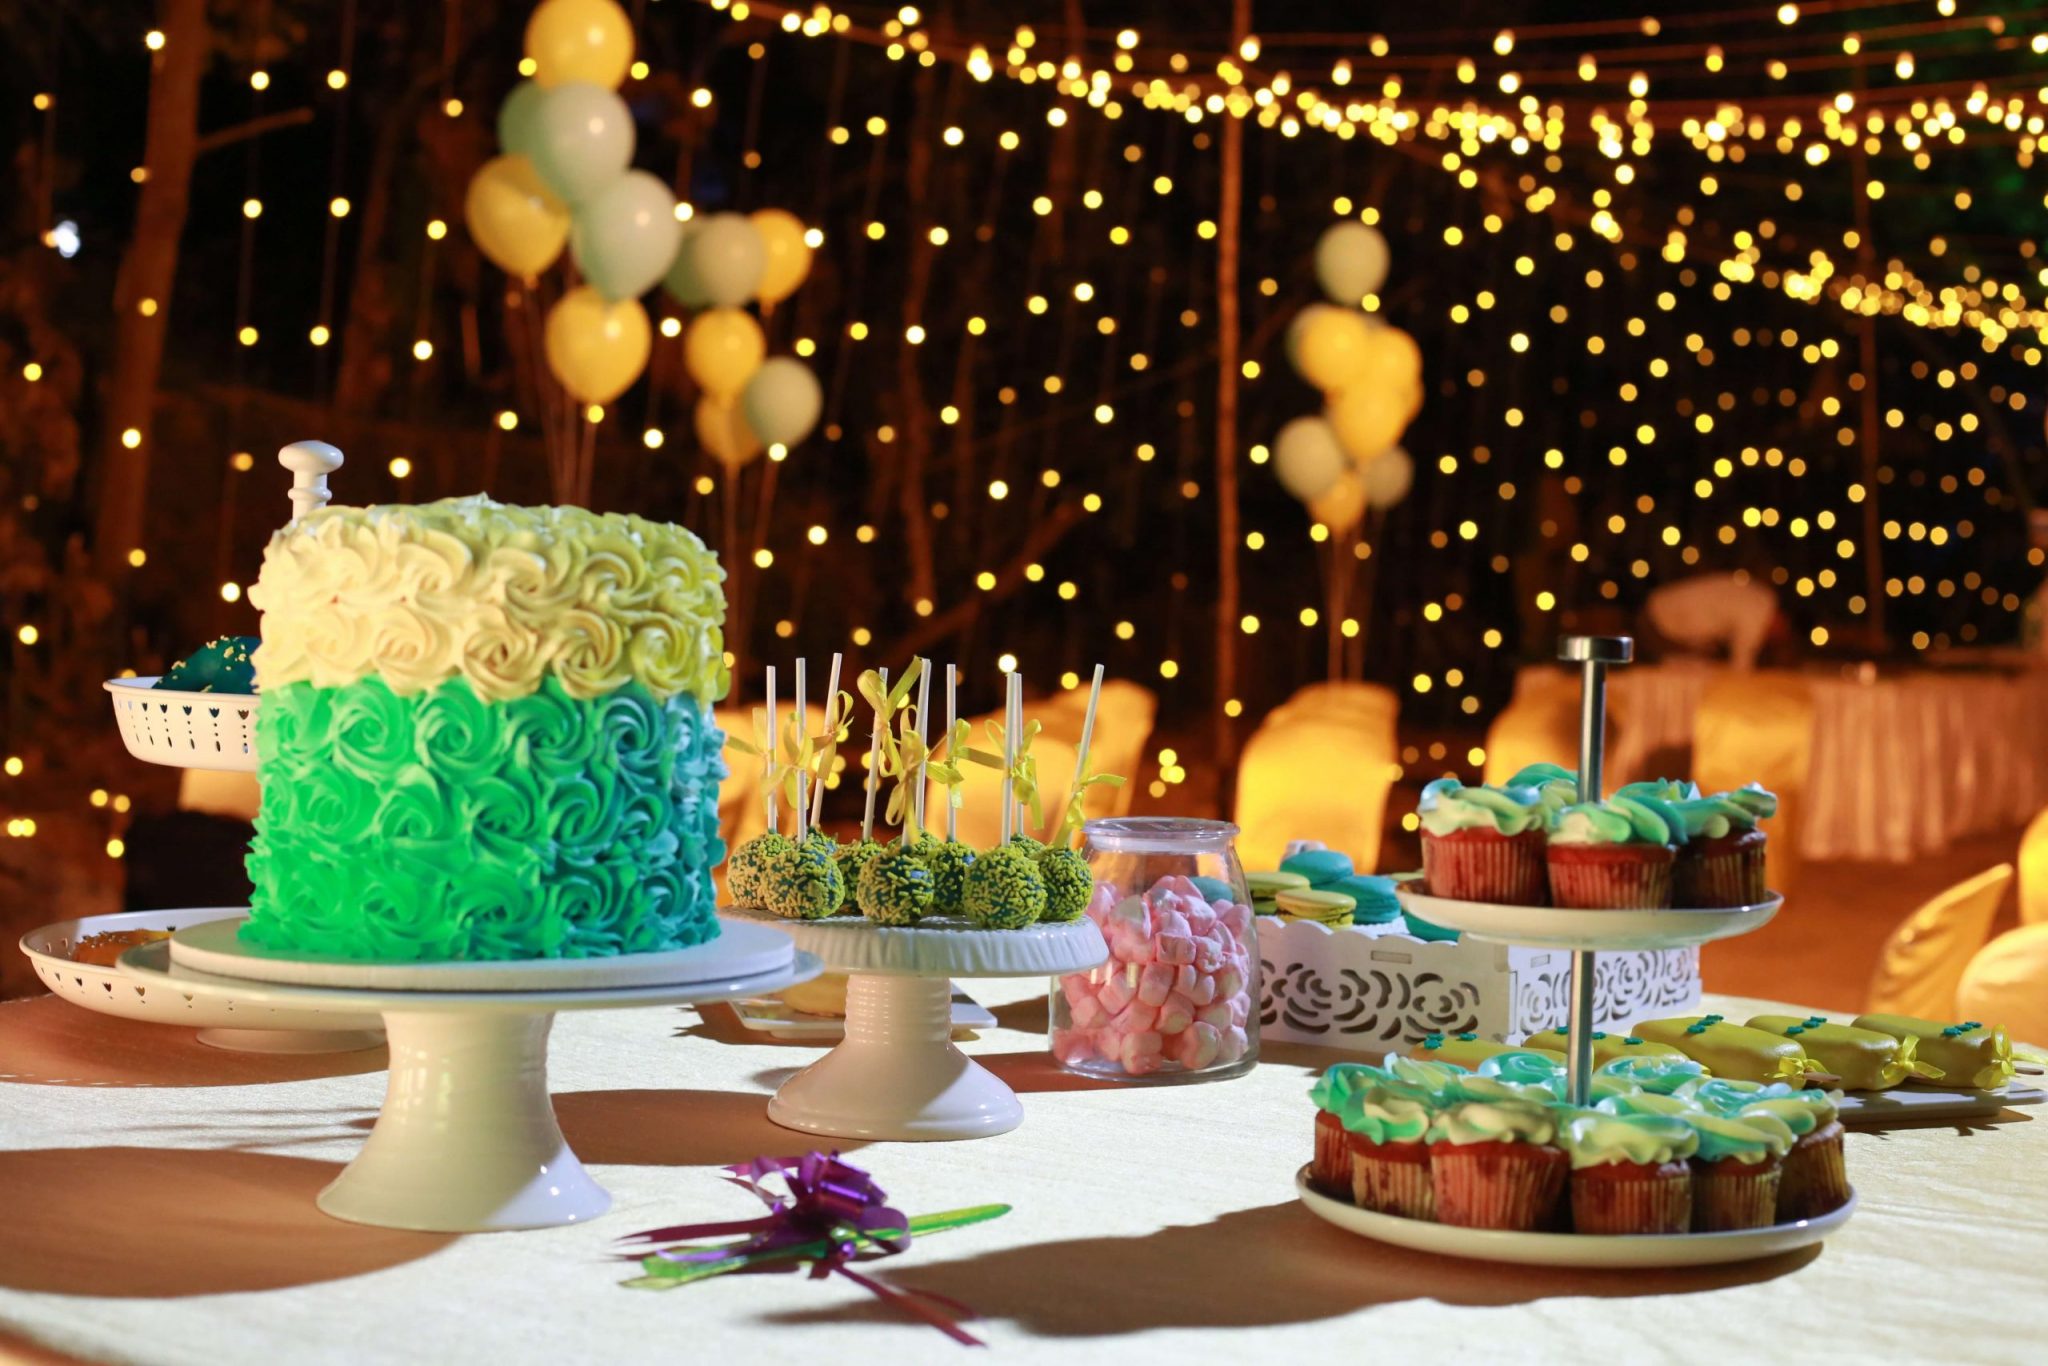 Creating Memorable Birthday Parties: An Event Planning Guide